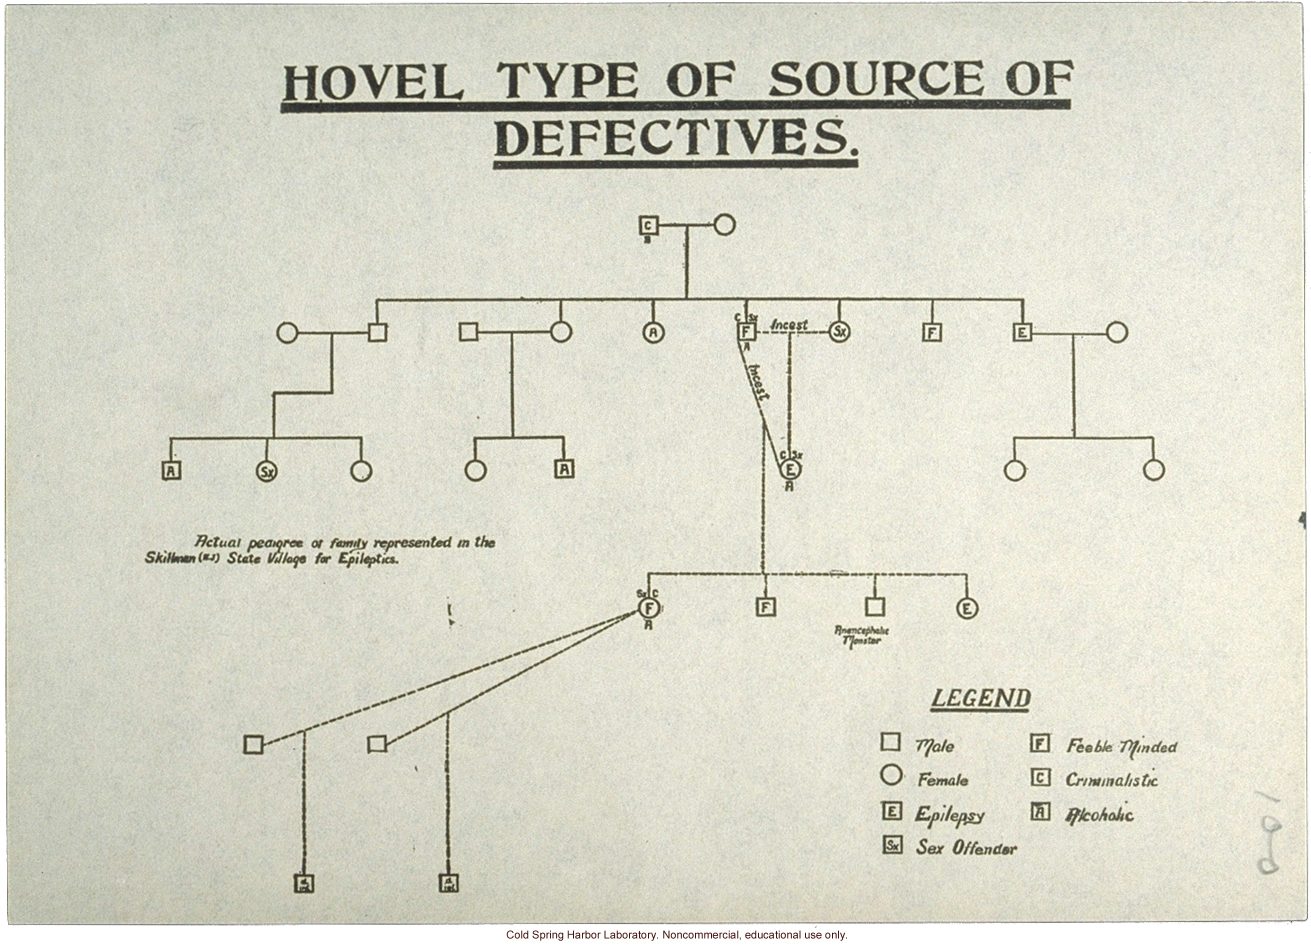 &quote;Hovel Type of Source of Defectives,&quote; pedigree of epilepsy and feeblemindedness